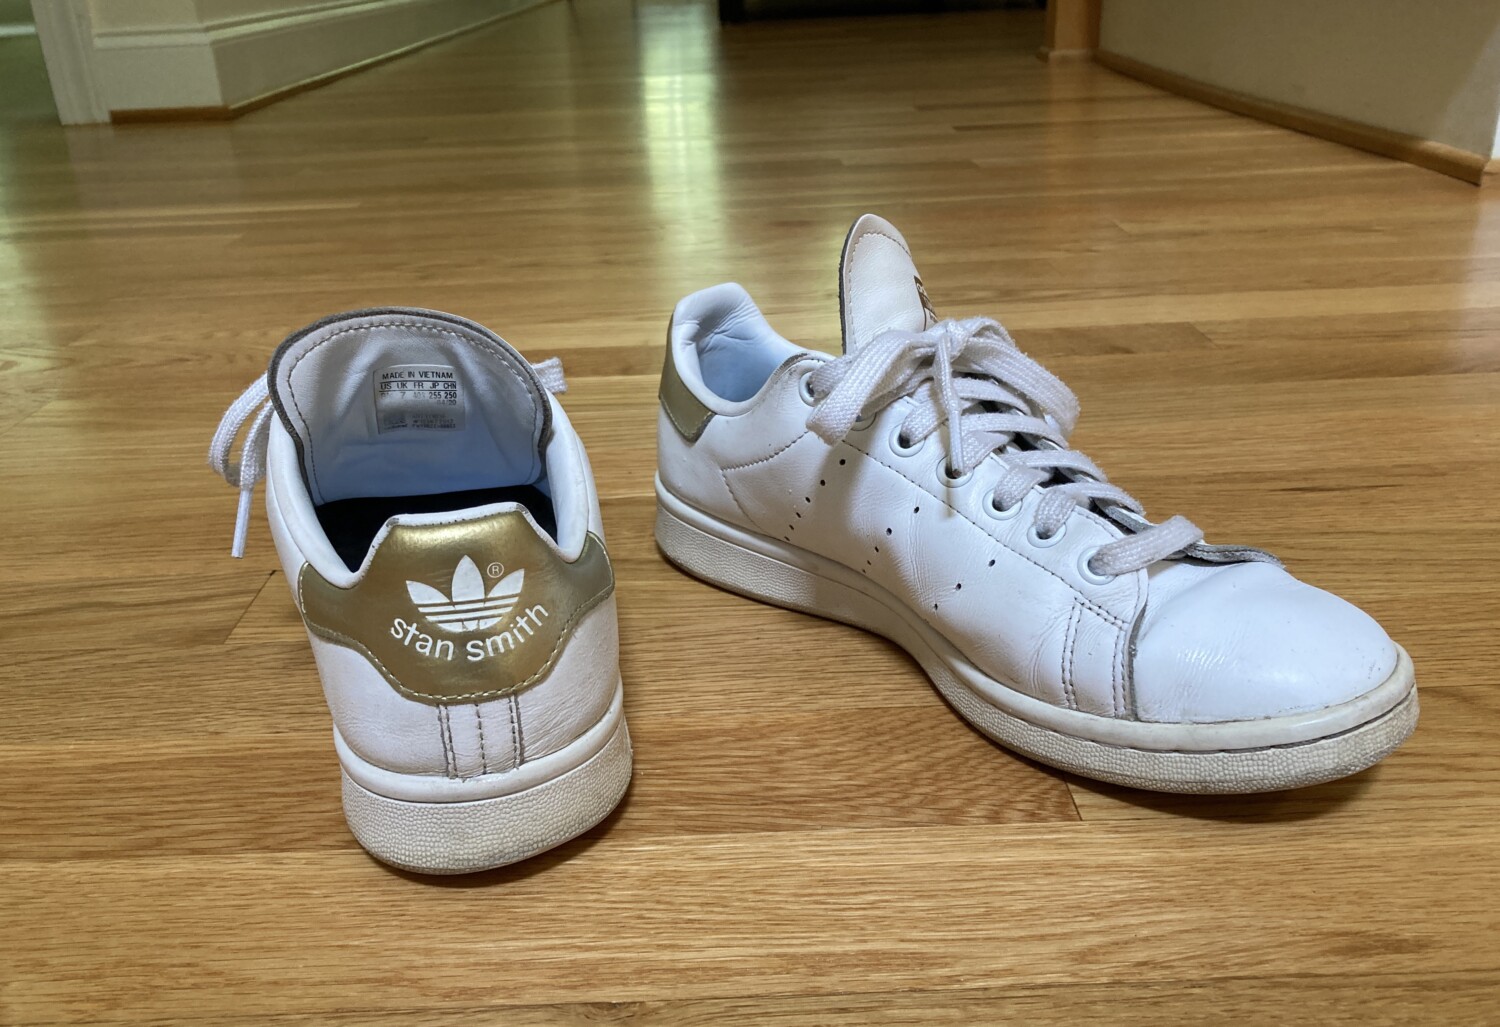 Author's Stan Smith shoes